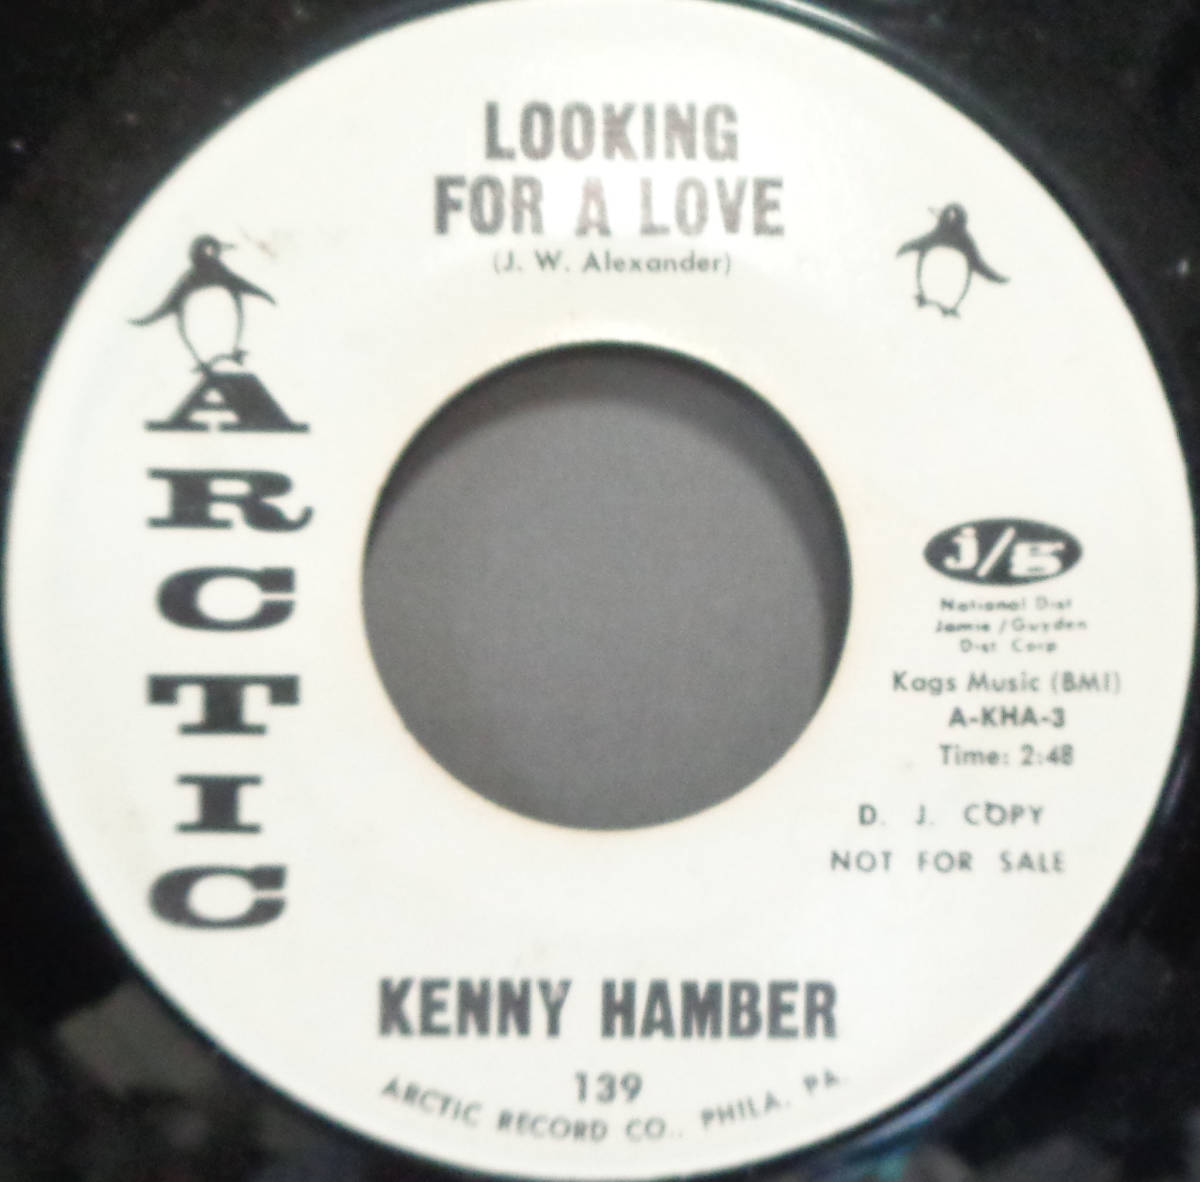 【SOUL 45】KENNY HAMBER - LOOKING FOR A LOVE (s231009024)_画像1